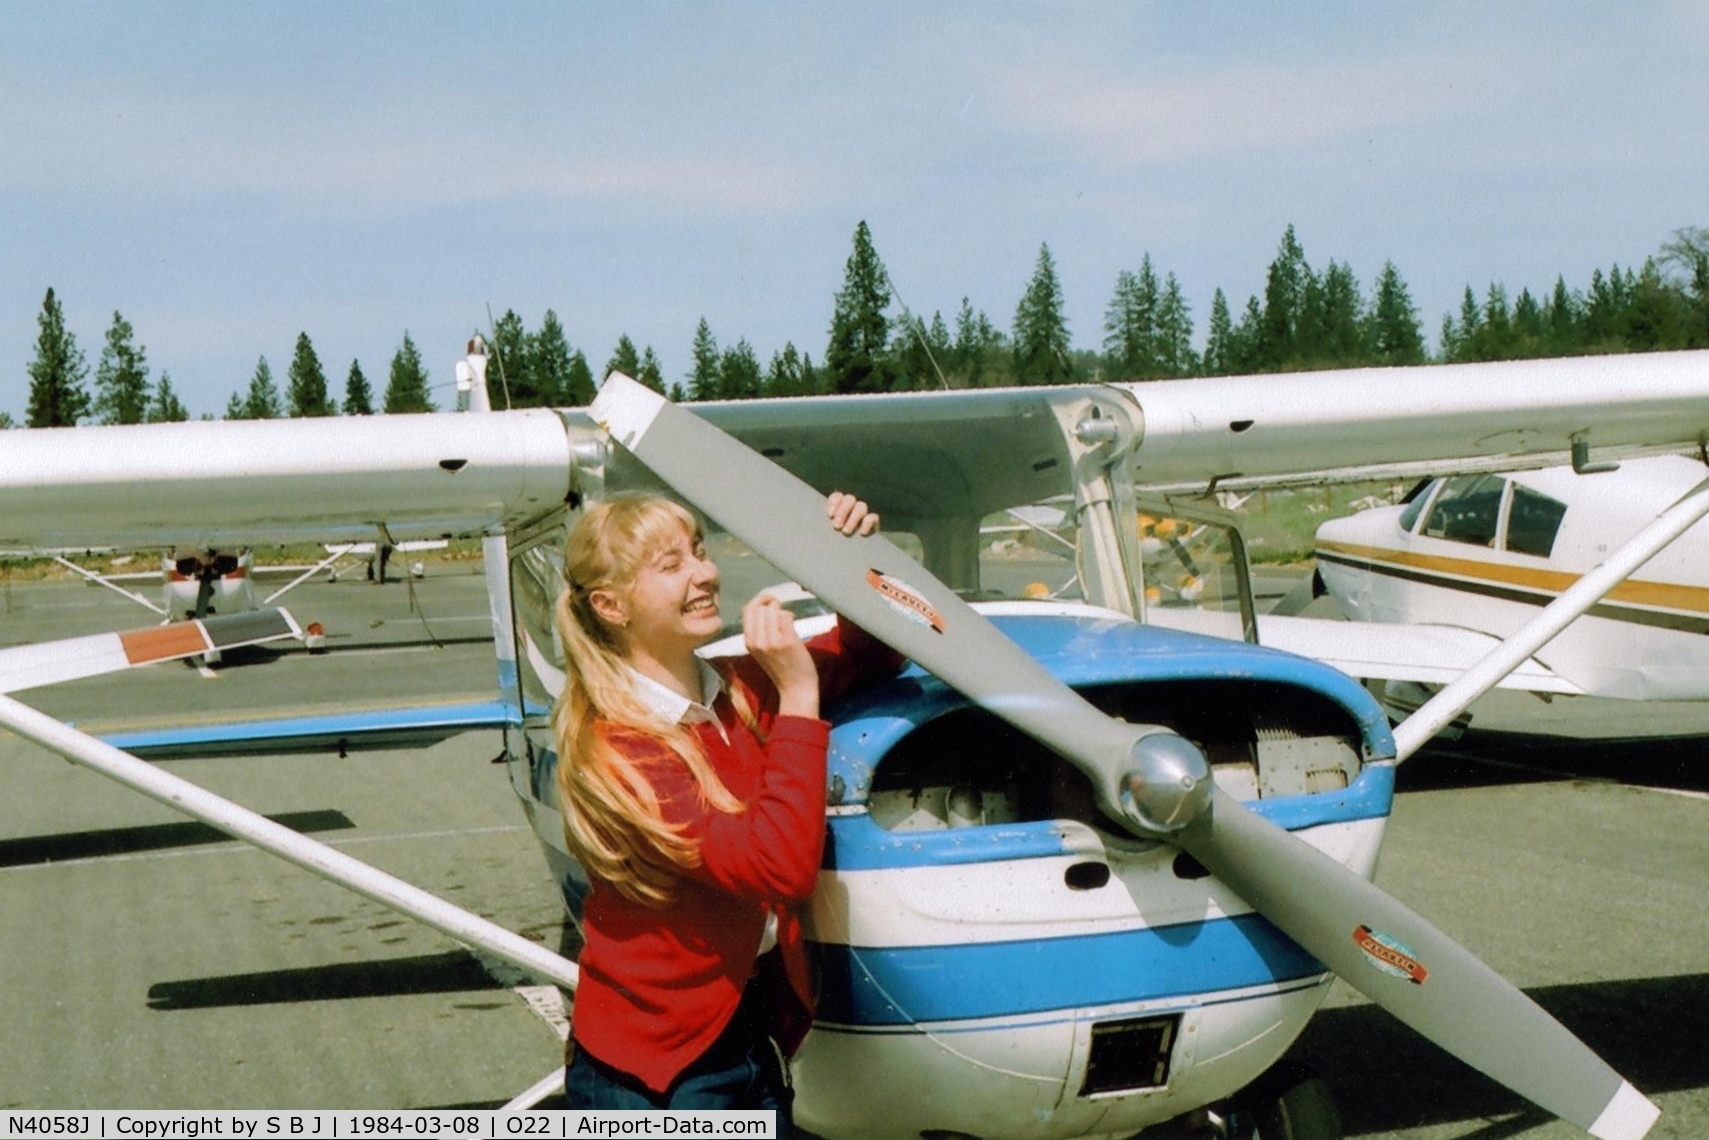 N4058J, 1966 Cessna 150G C/N 15065358, Frist lesson? Frist solo? Ramp check? Or just being blond?